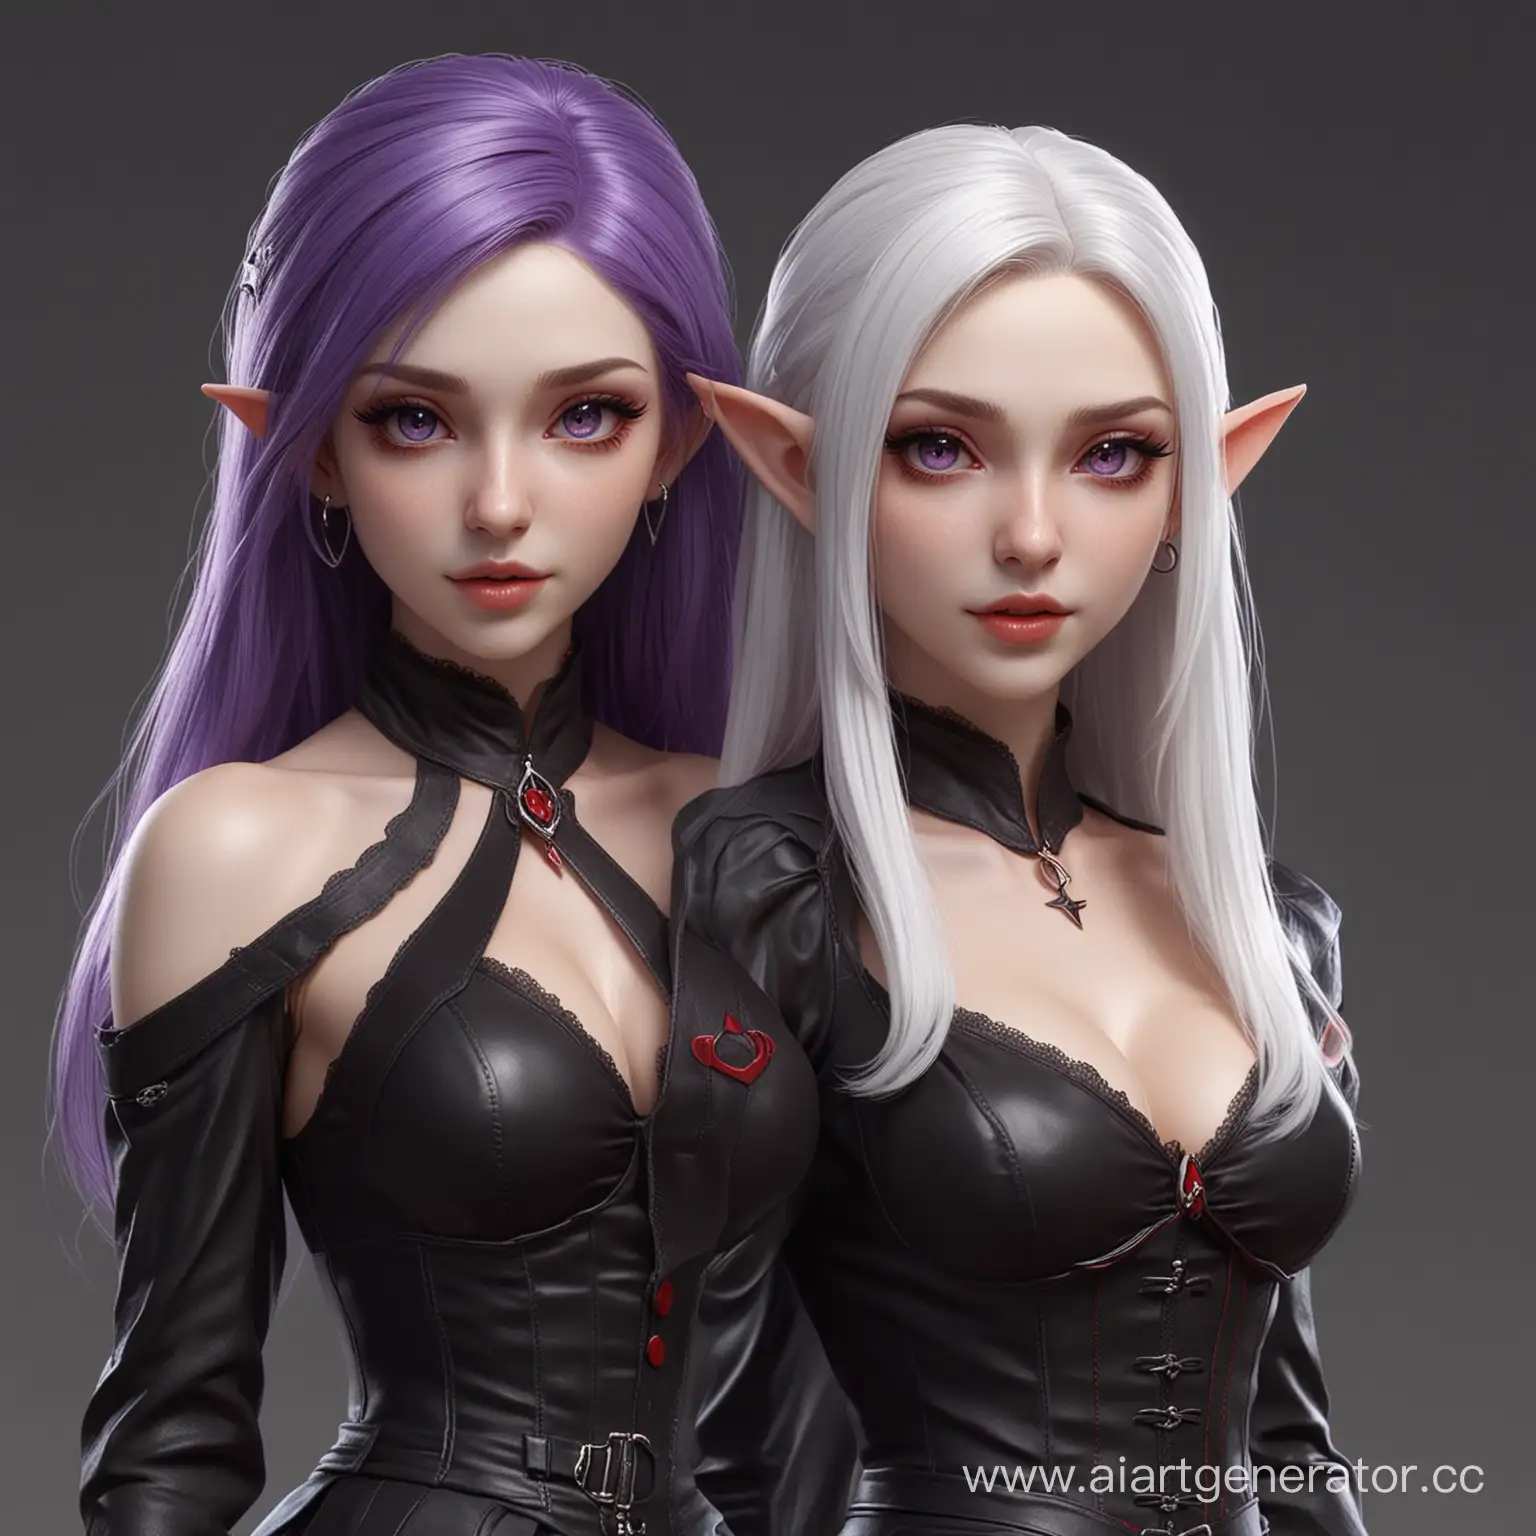 Fantasy-3D-Illustration-Vampire-Girl-and-Elf-with-Purple-Hair-and-Red-Eyes